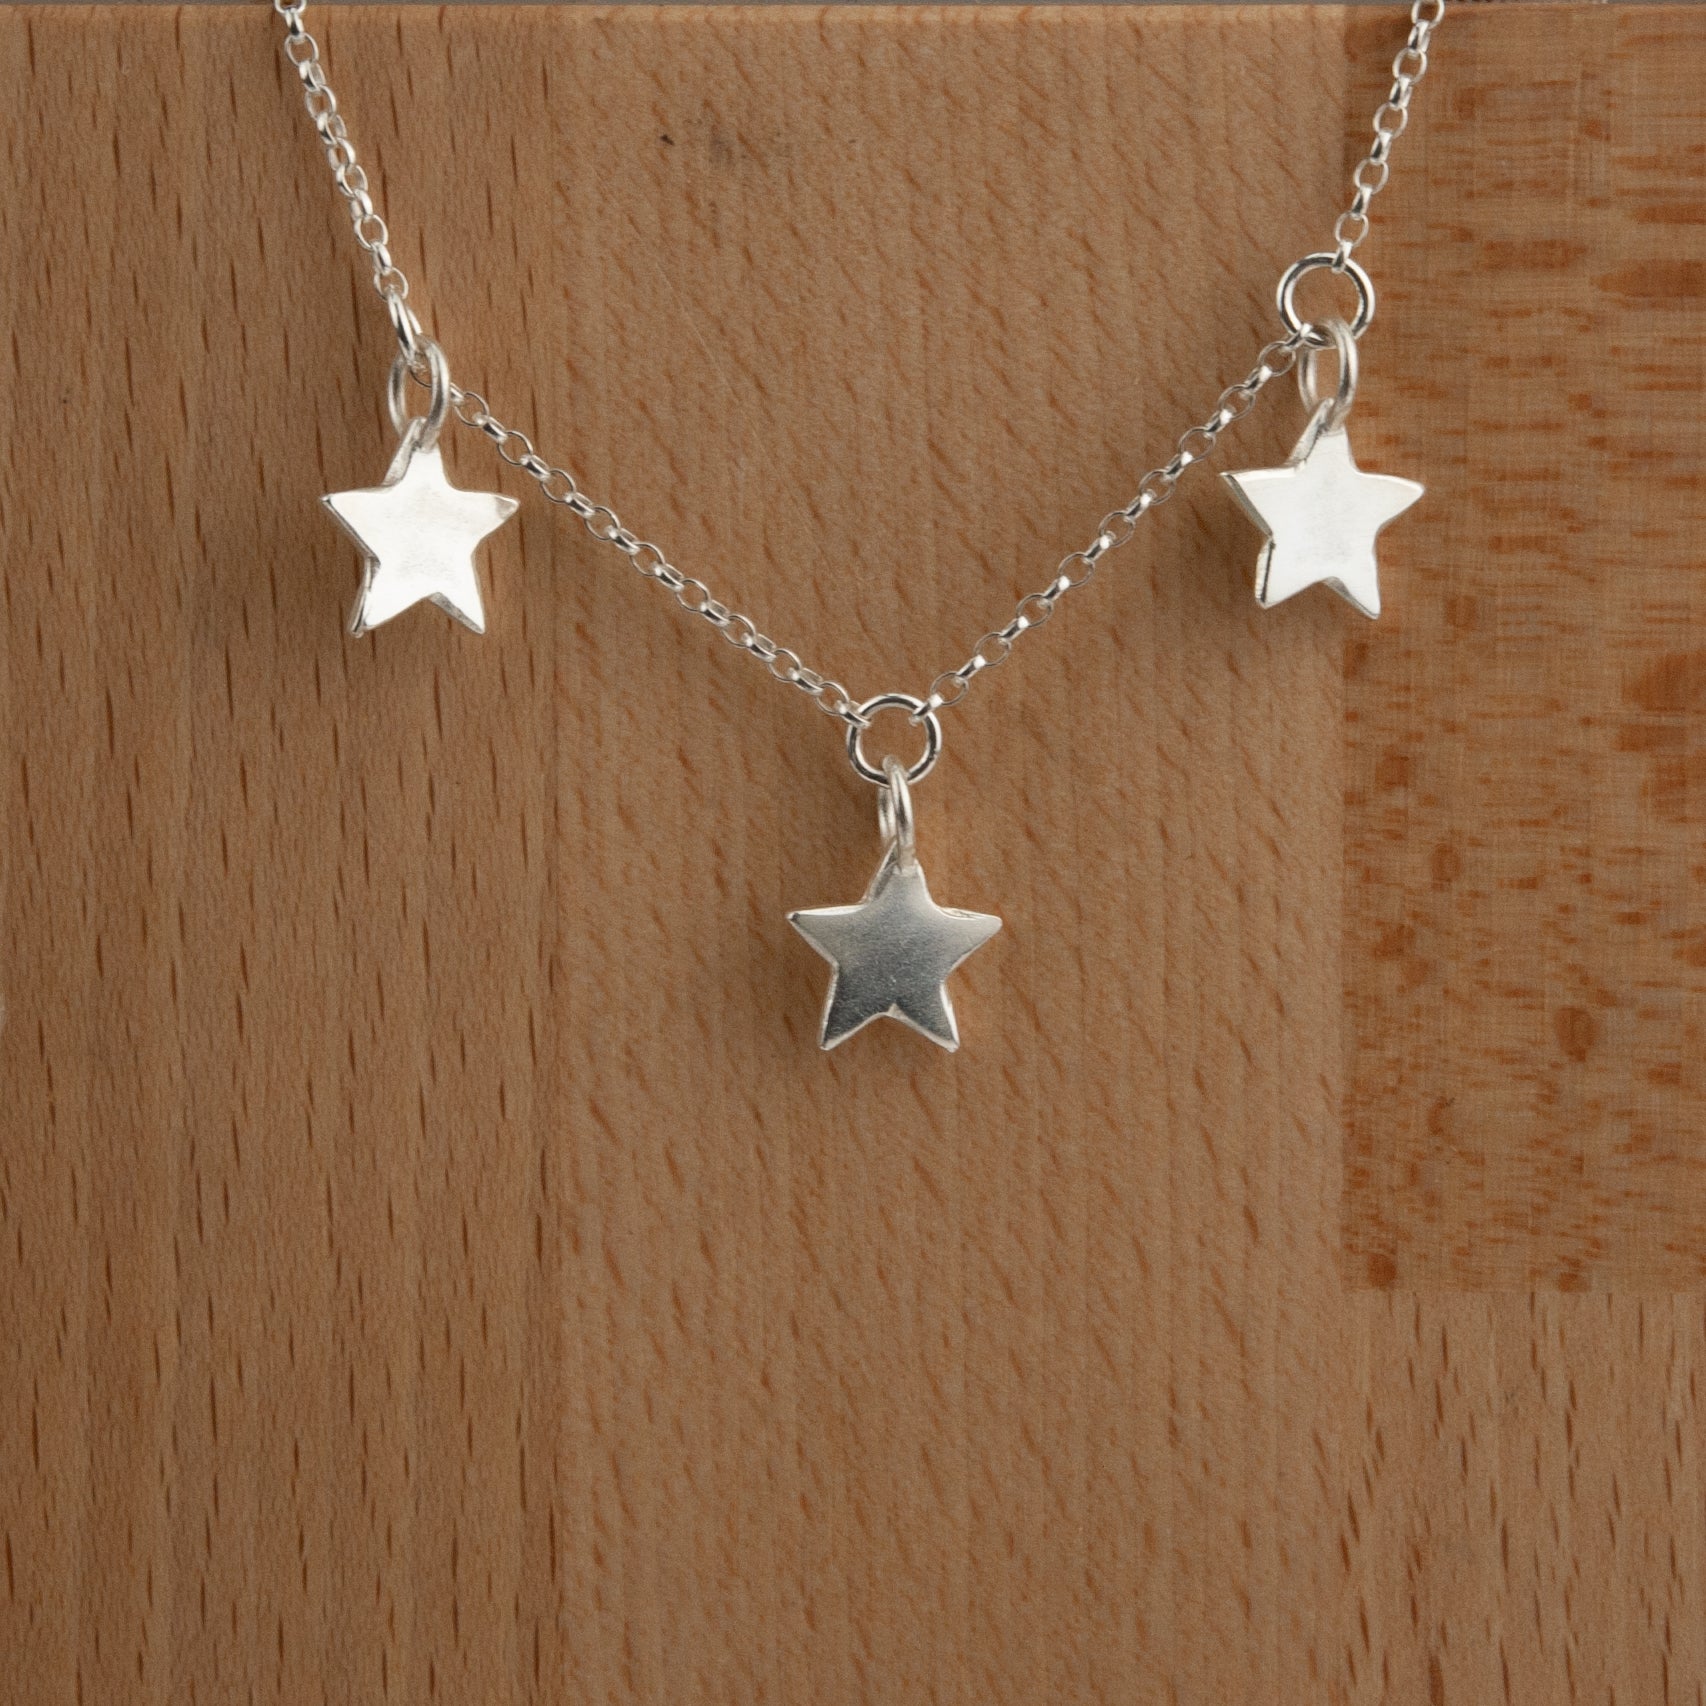 Belle & Bee sterling silver 3 star necklace